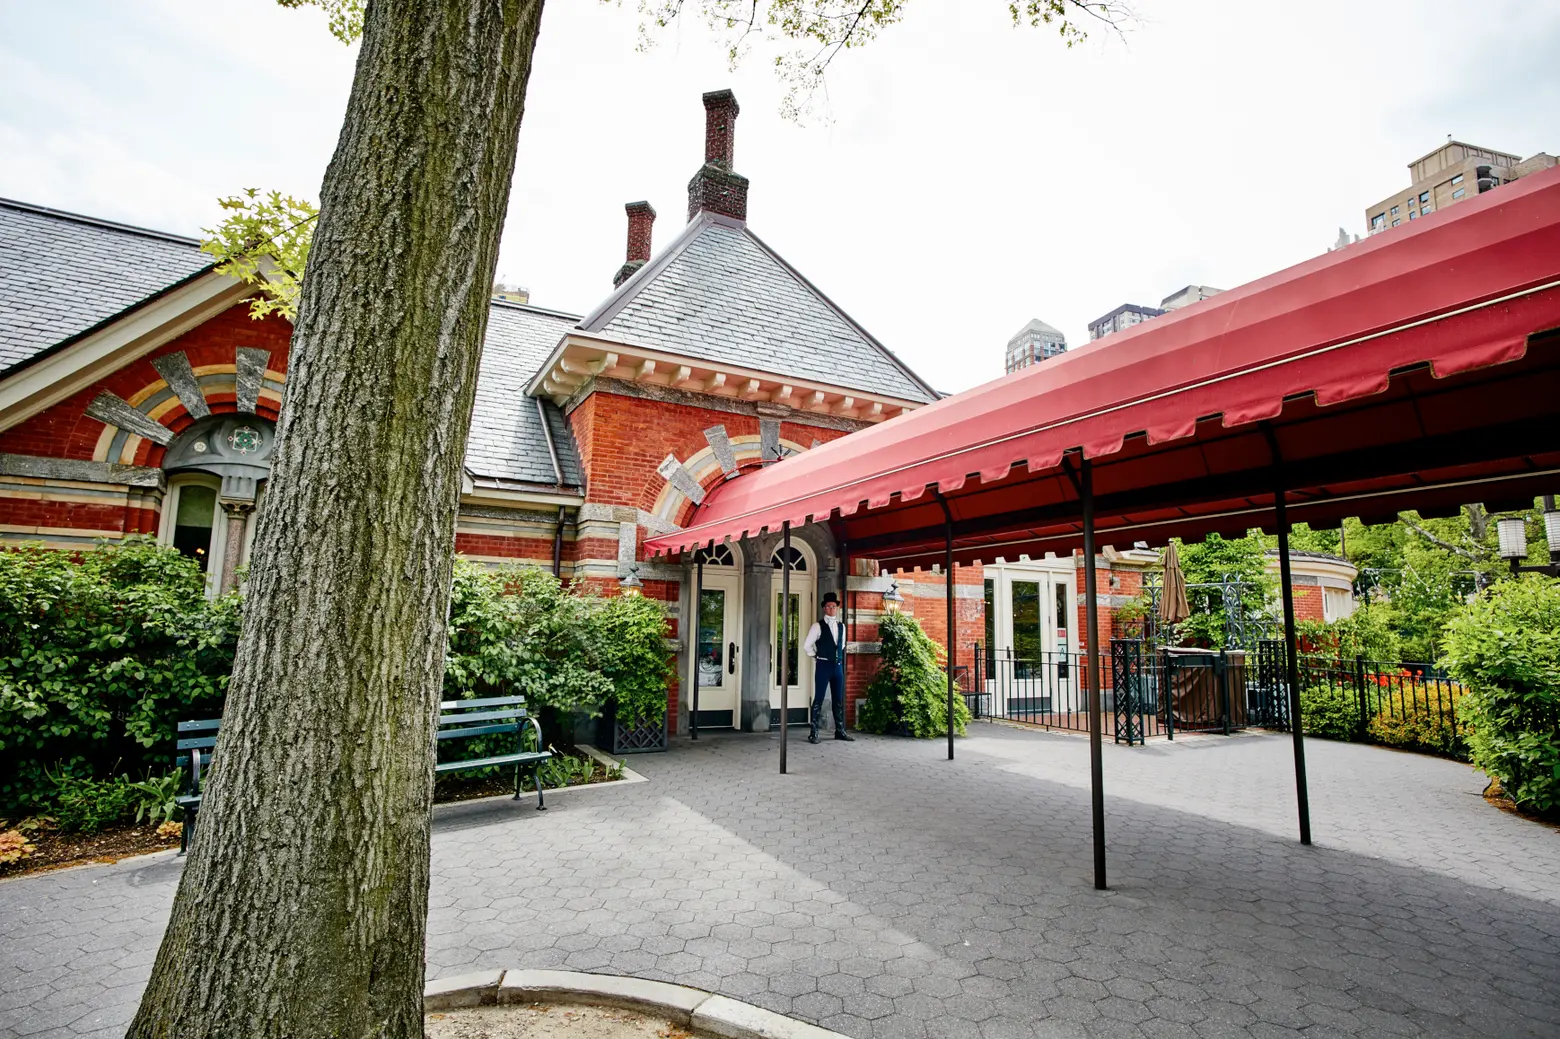 Central Park’s iconic Tavern on the Green will reopen after 13 months